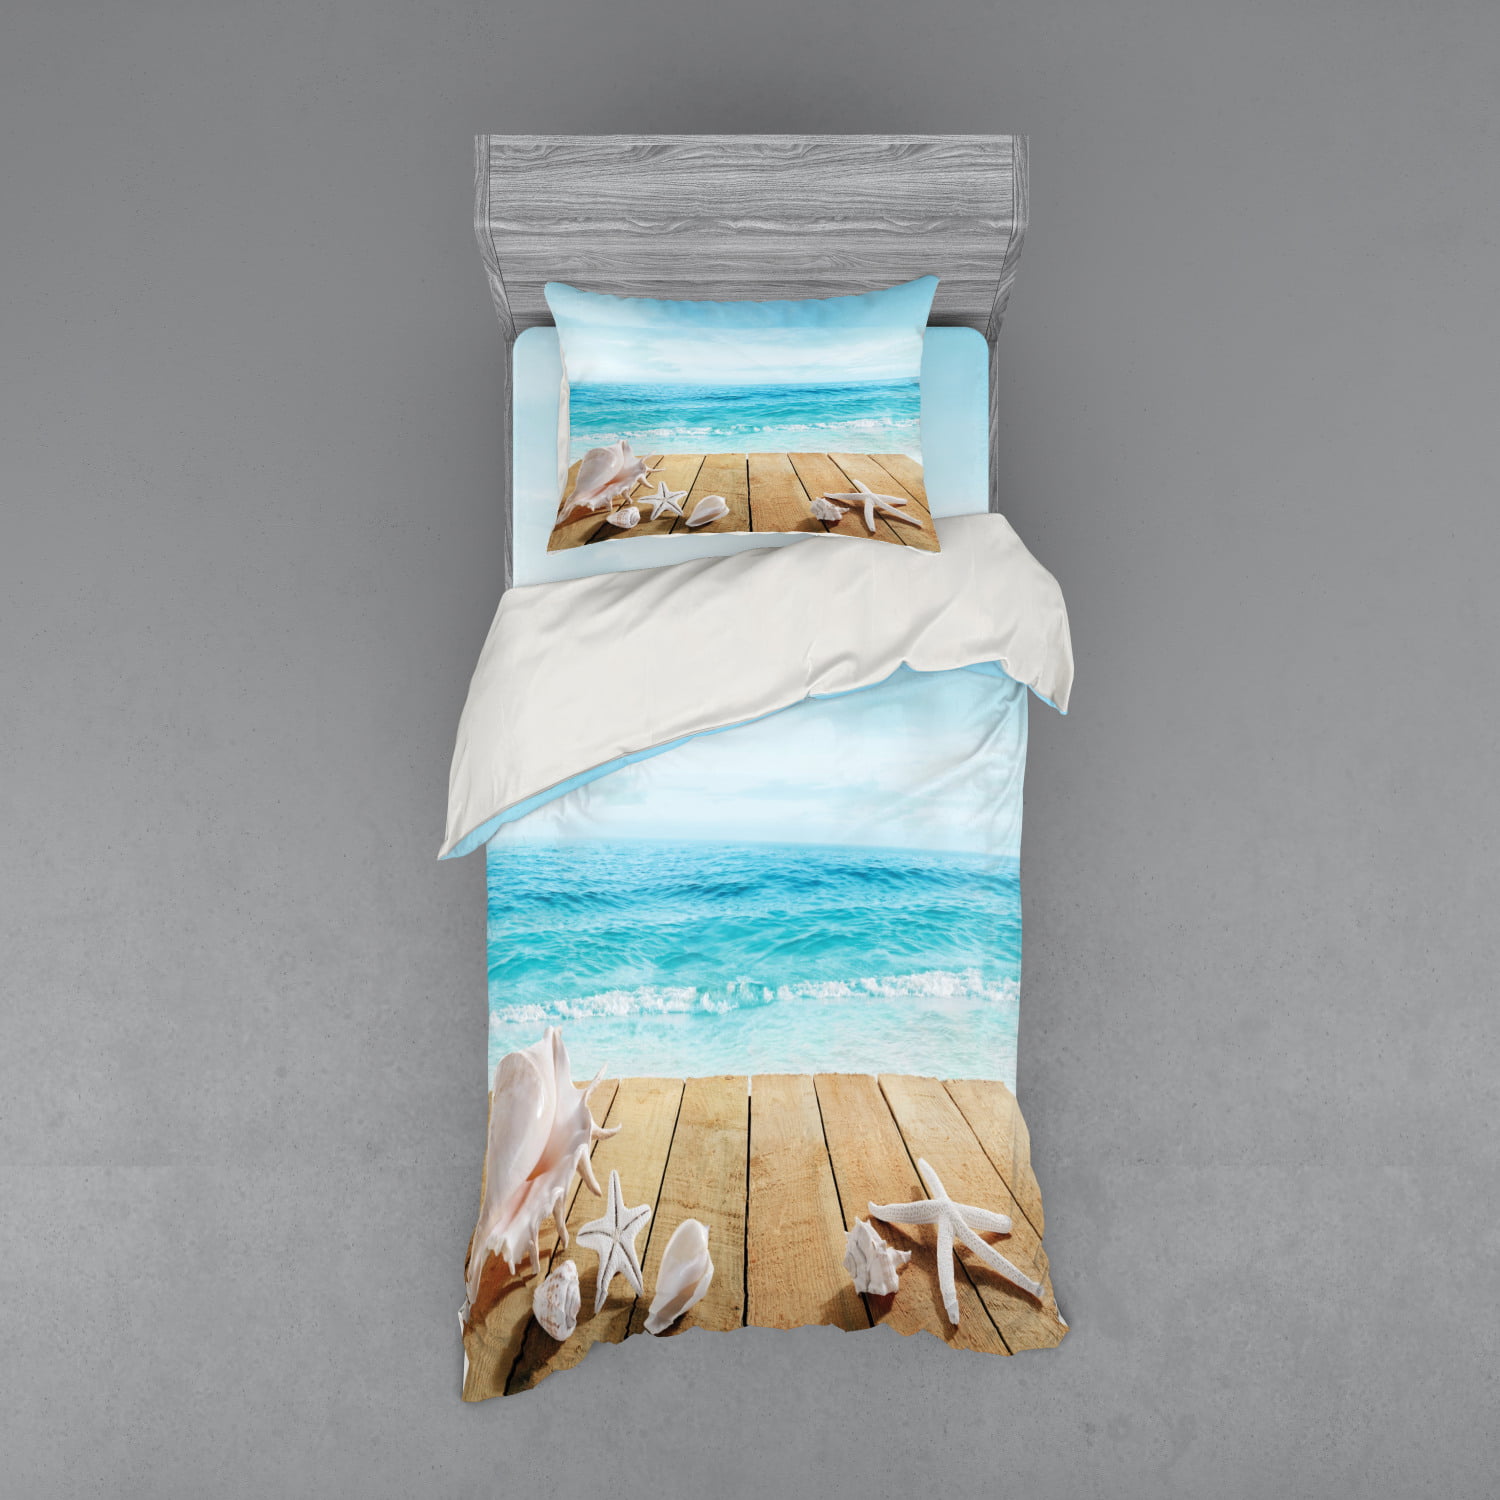 Seass Duvet Cover Set Wooden, What Size Is A Single Duvet Cover In Inches